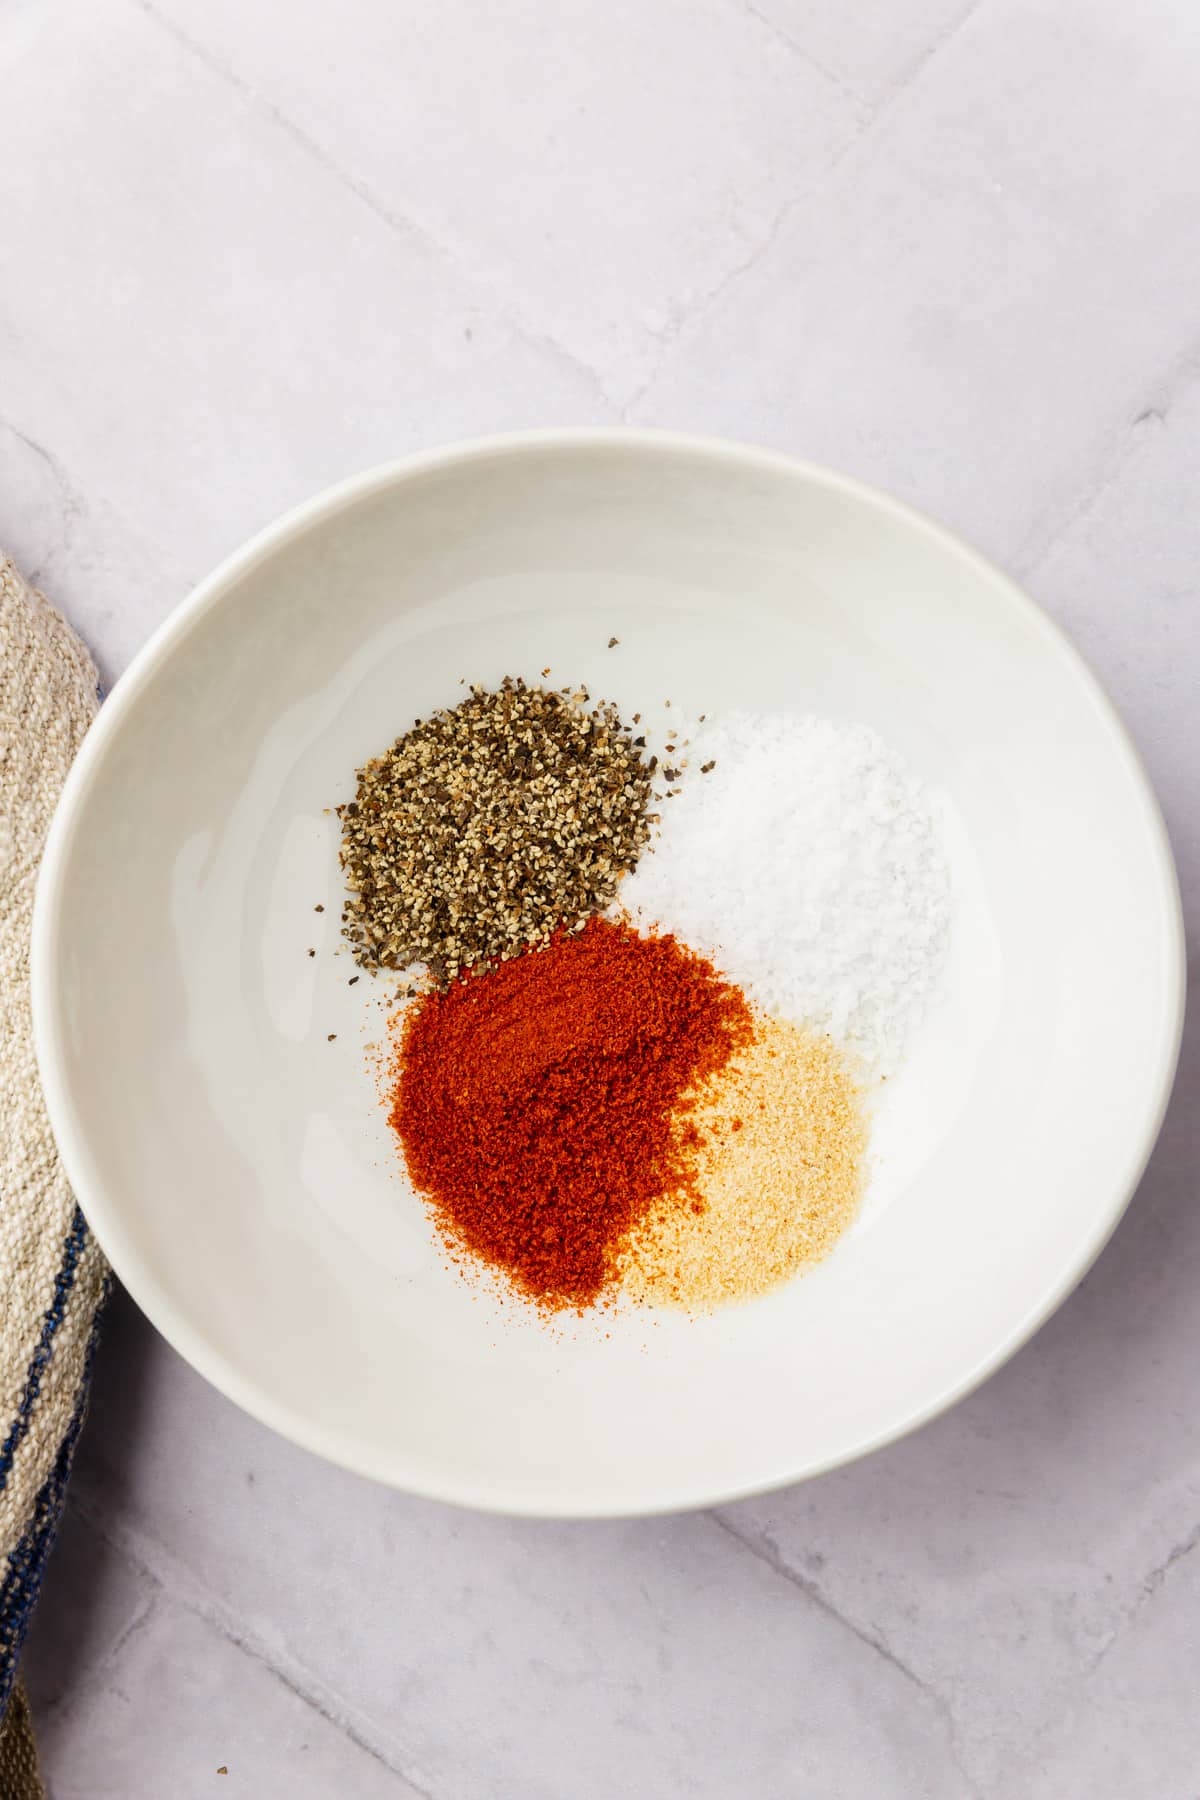 Black pepper, salt, paprika, and garlic powder in a white ceramic bowl before mixing together.